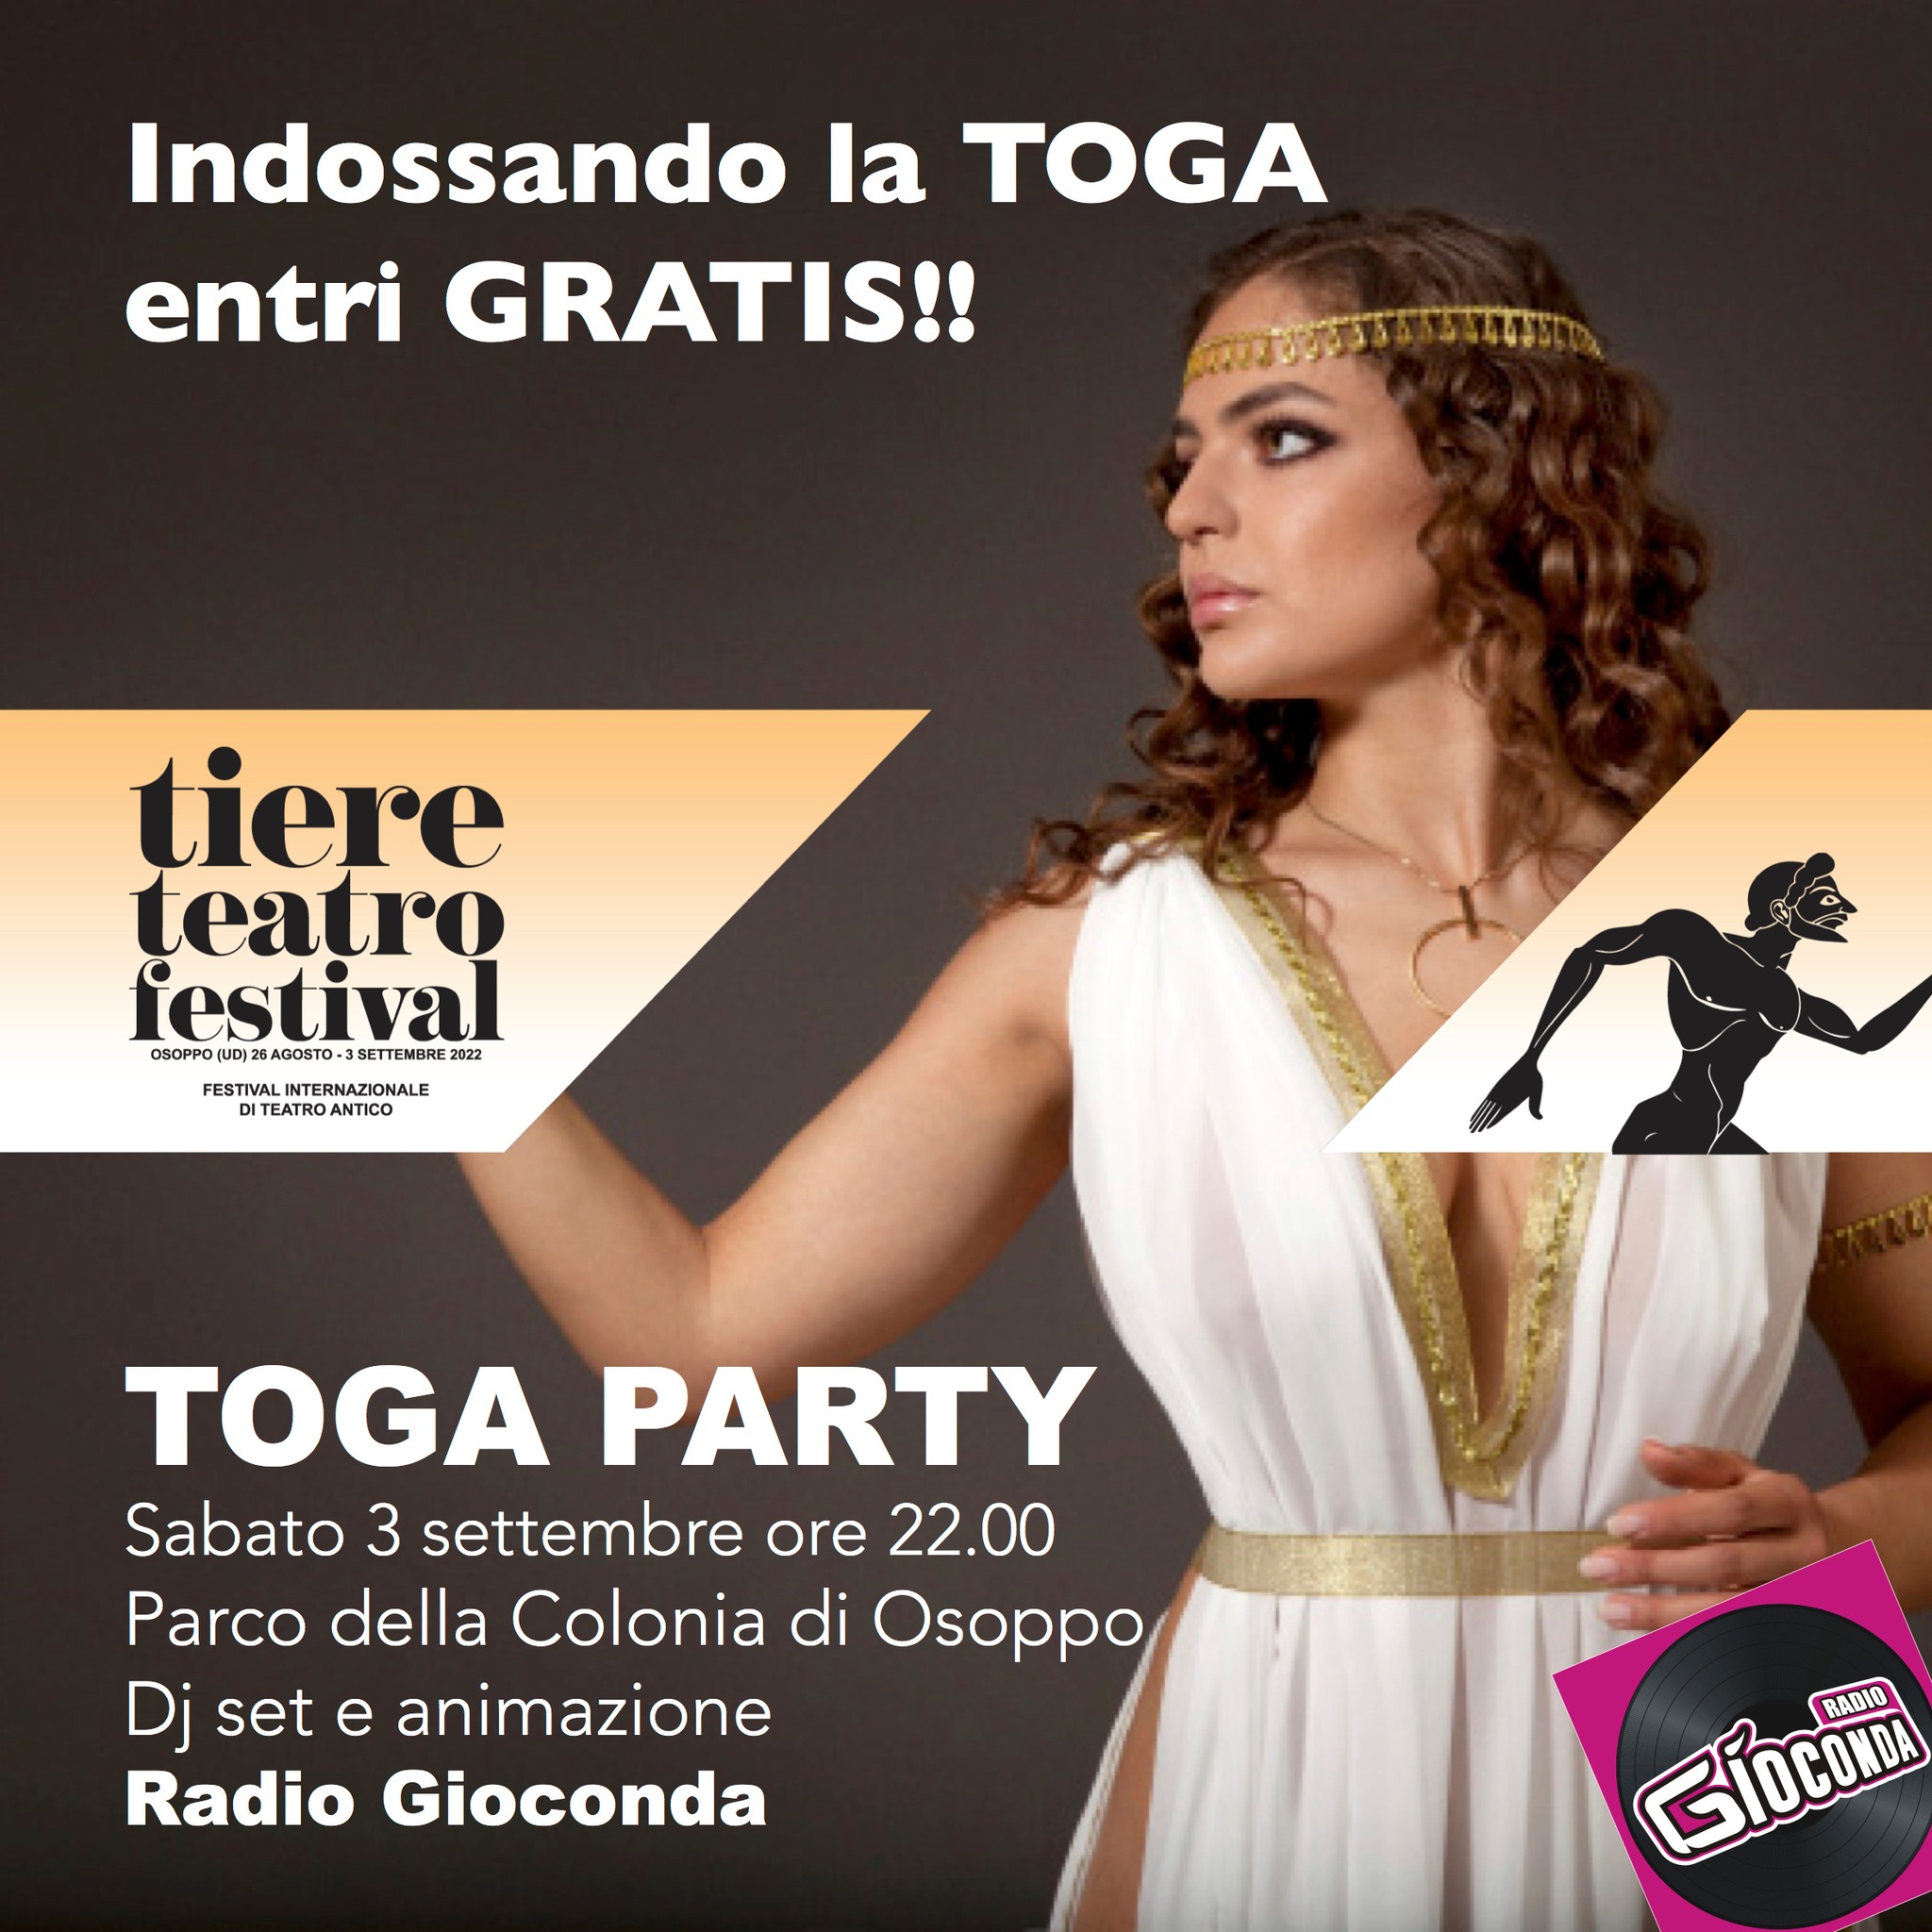 TOGA PARTY a Osoppo